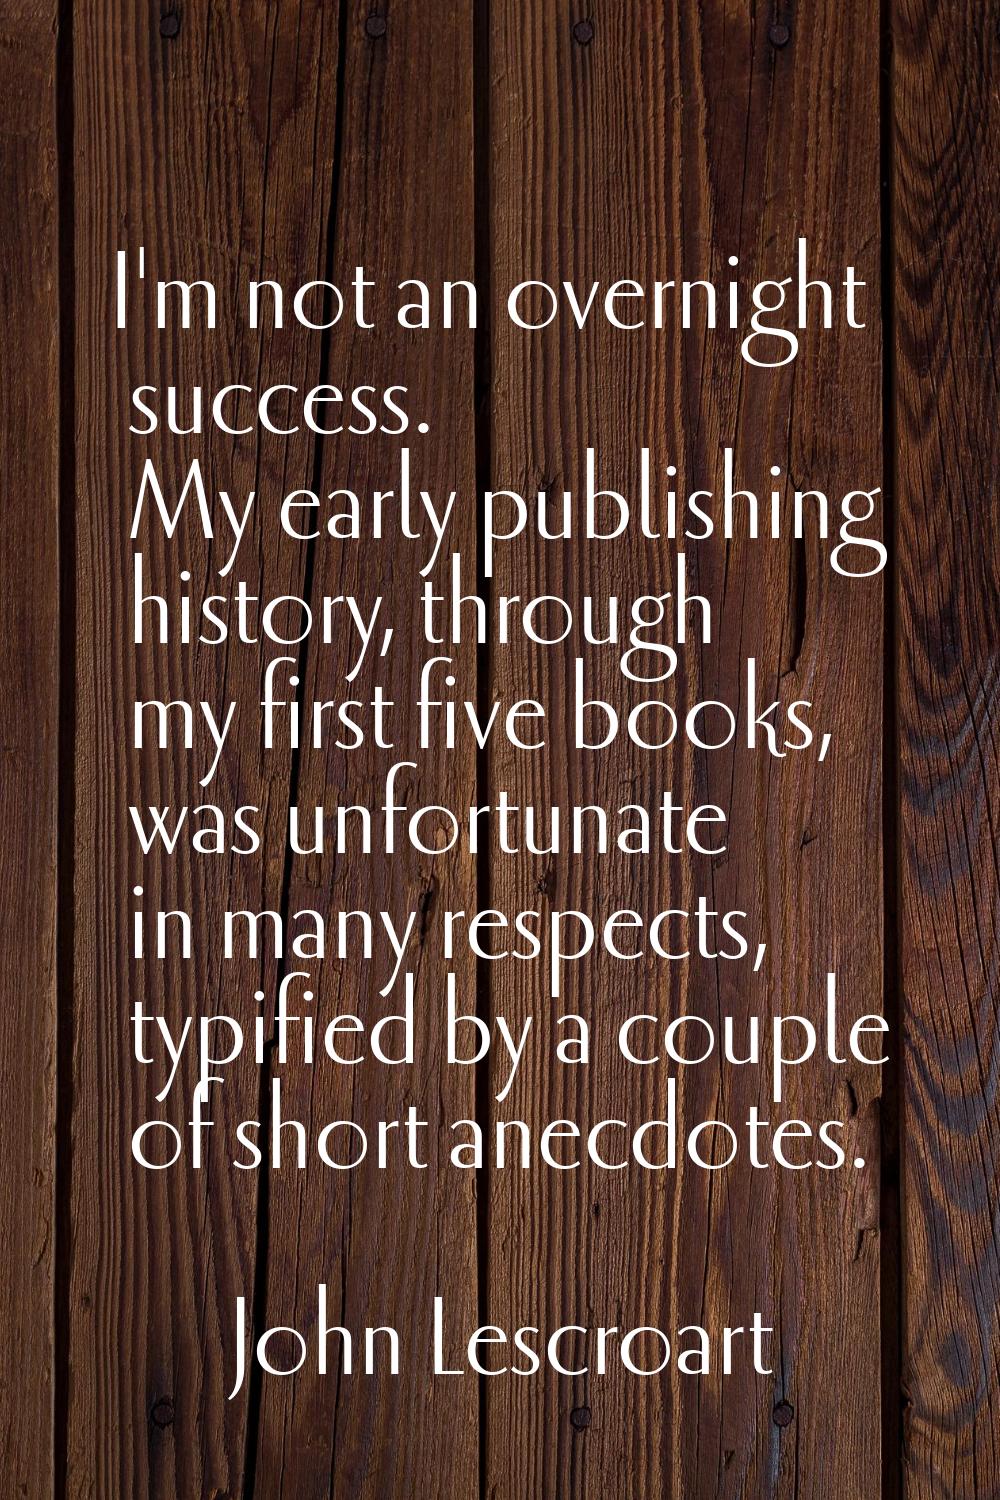 I'm not an overnight success. My early publishing history, through my first five books, was unfortu